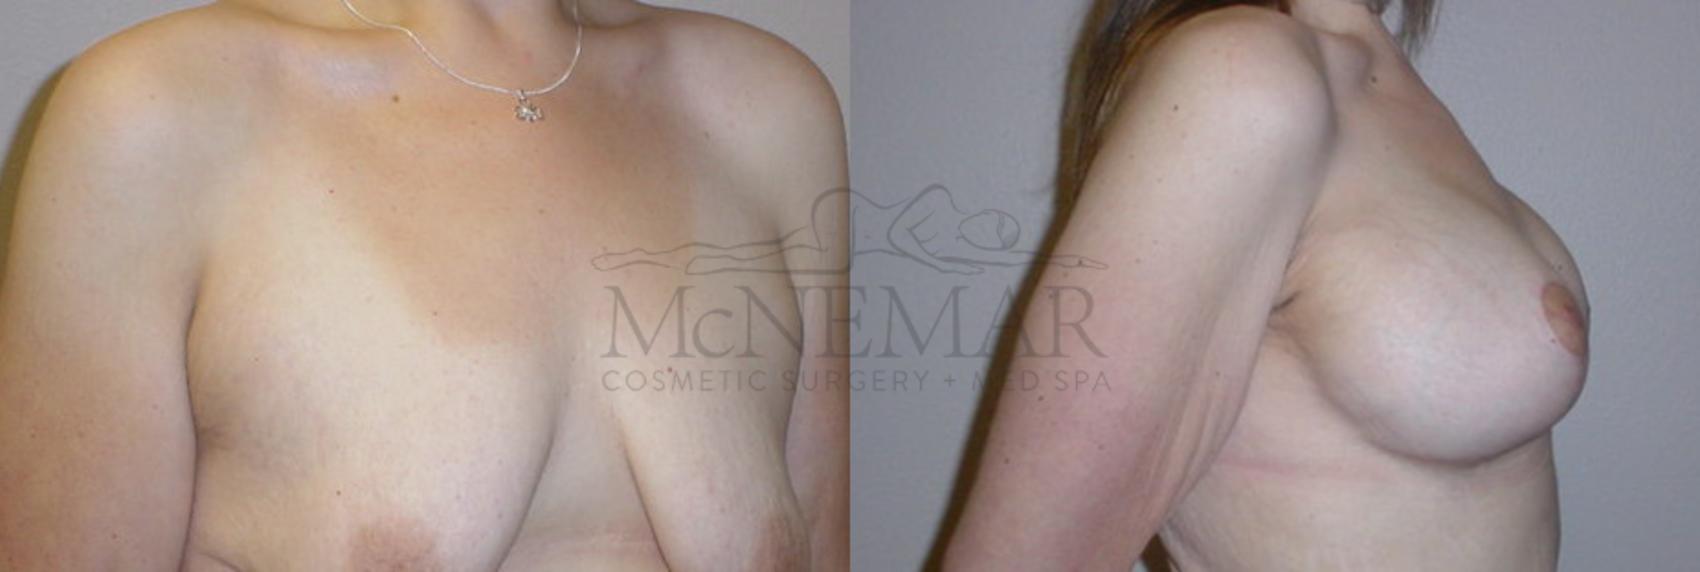 Breast Lift (Mastopexy) Case 106 Before & After View #2 | San Ramon & Tracy, CA | McNemar Cosmetic Surgery